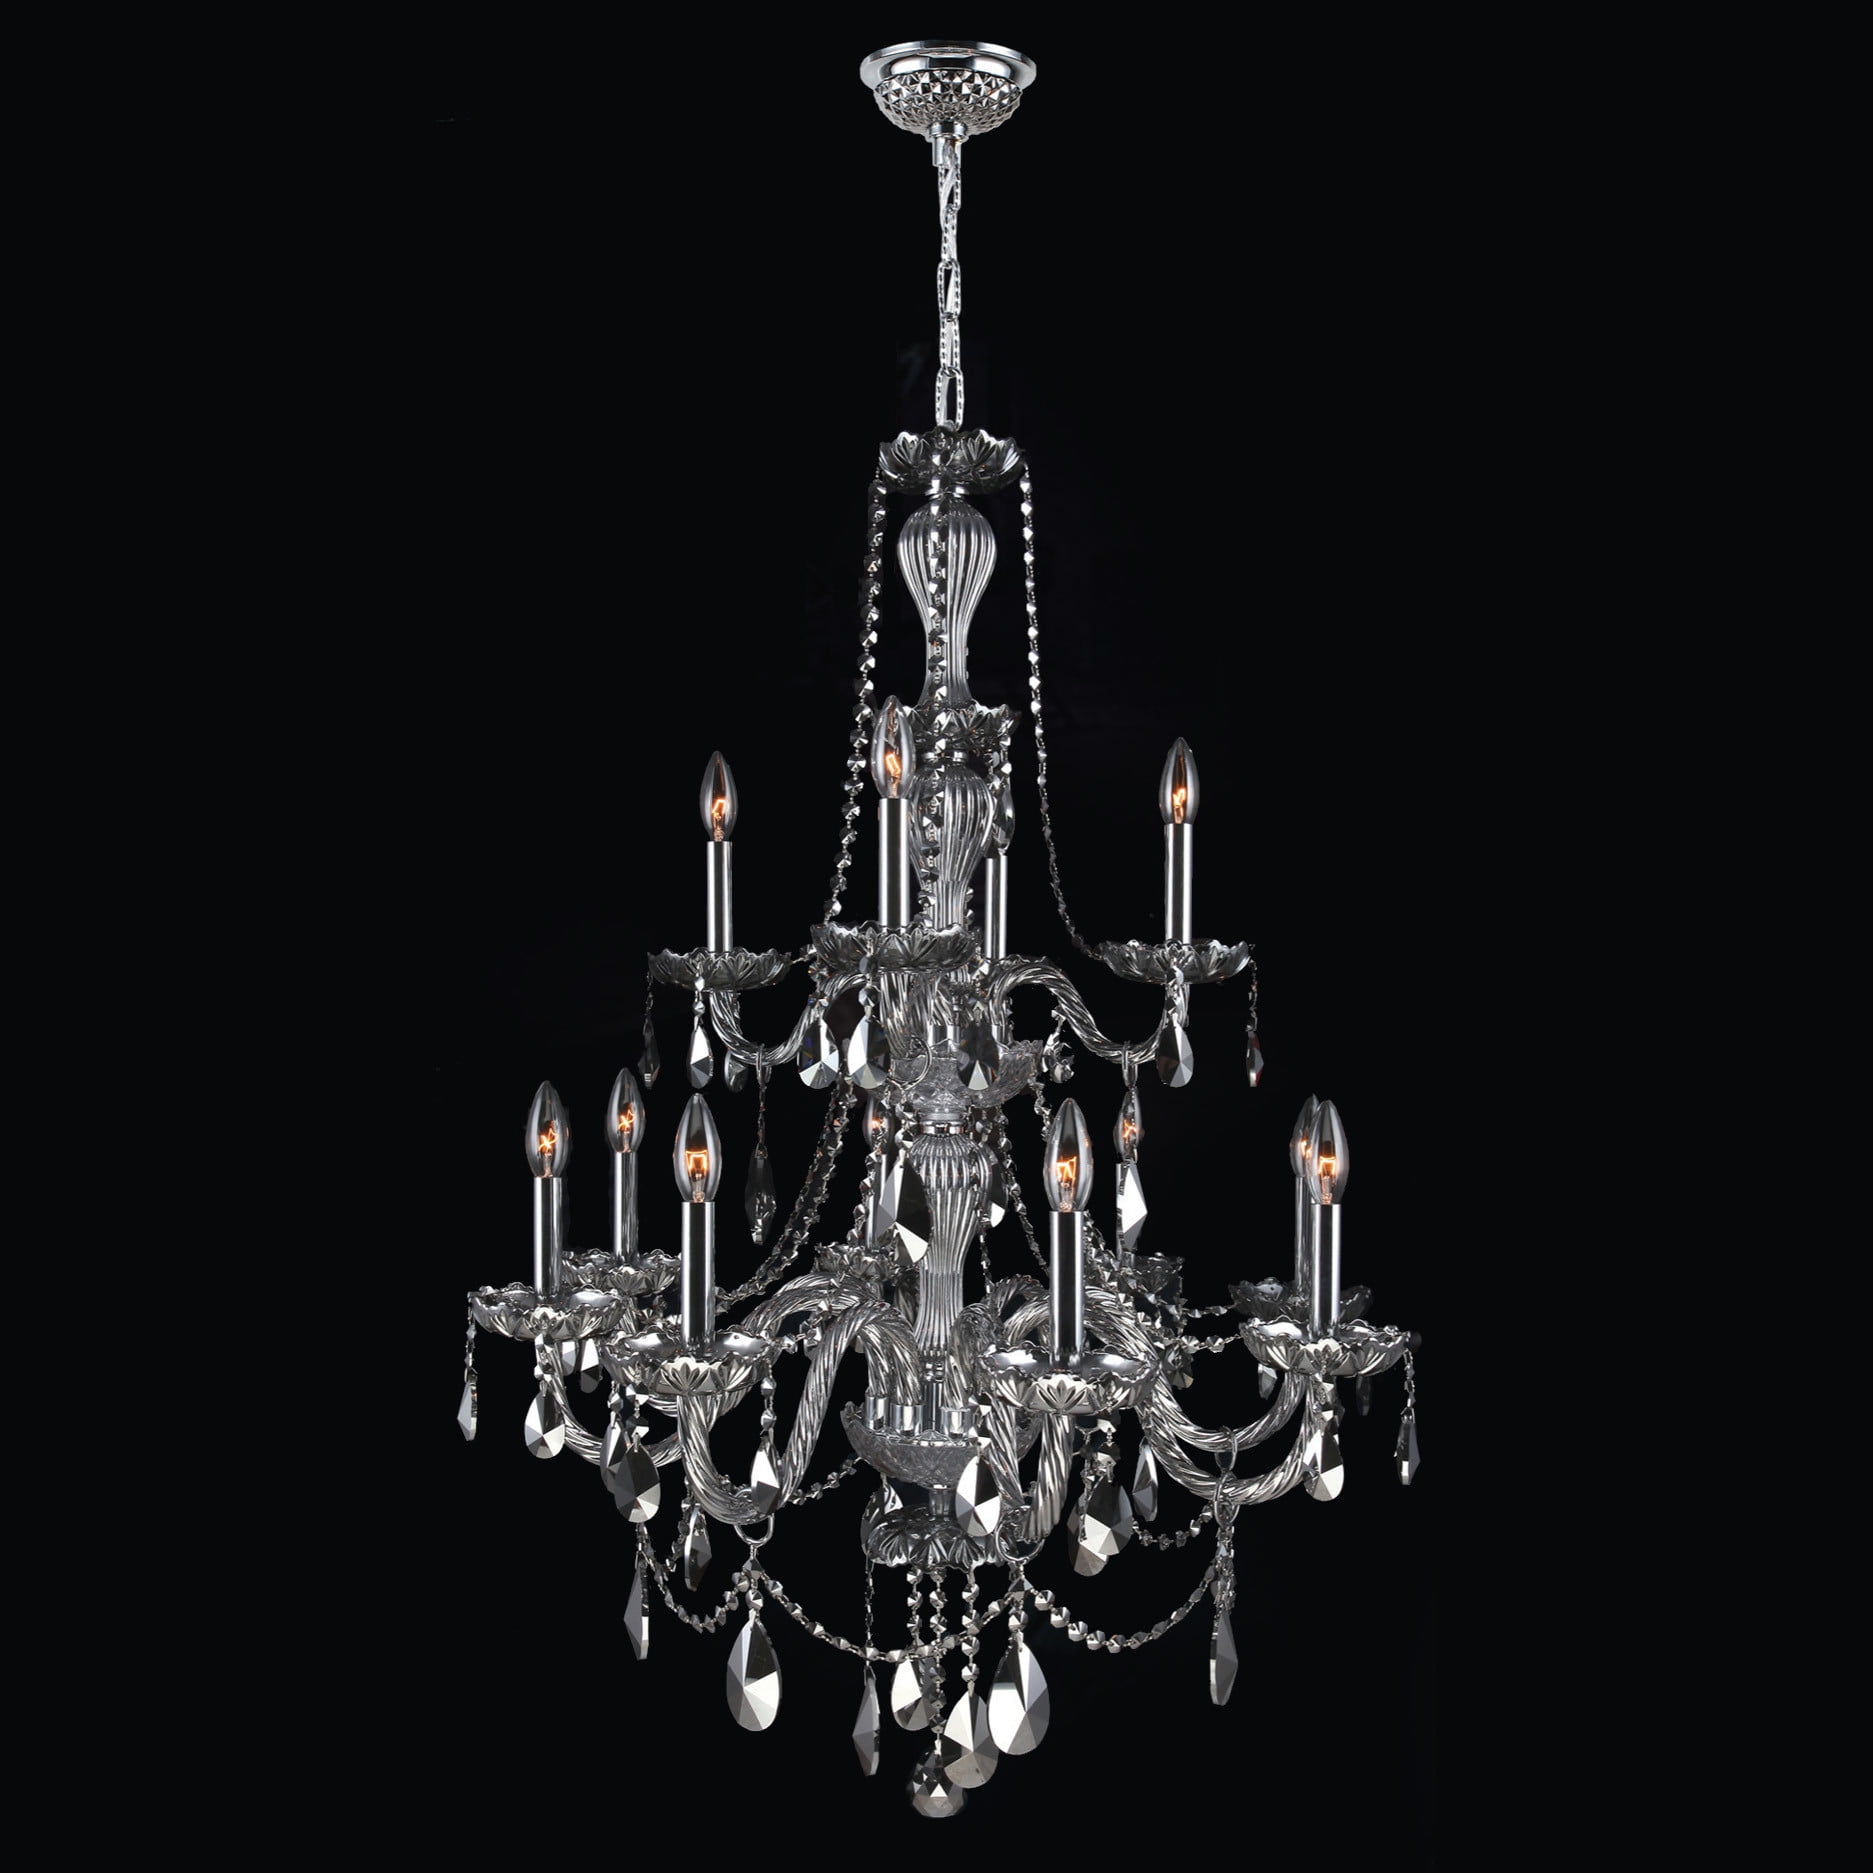 Provence Collection 12 Light Chrome Finish and Chrome Crystal Chandelier 28" D x 41" H Two 2 Tier Large